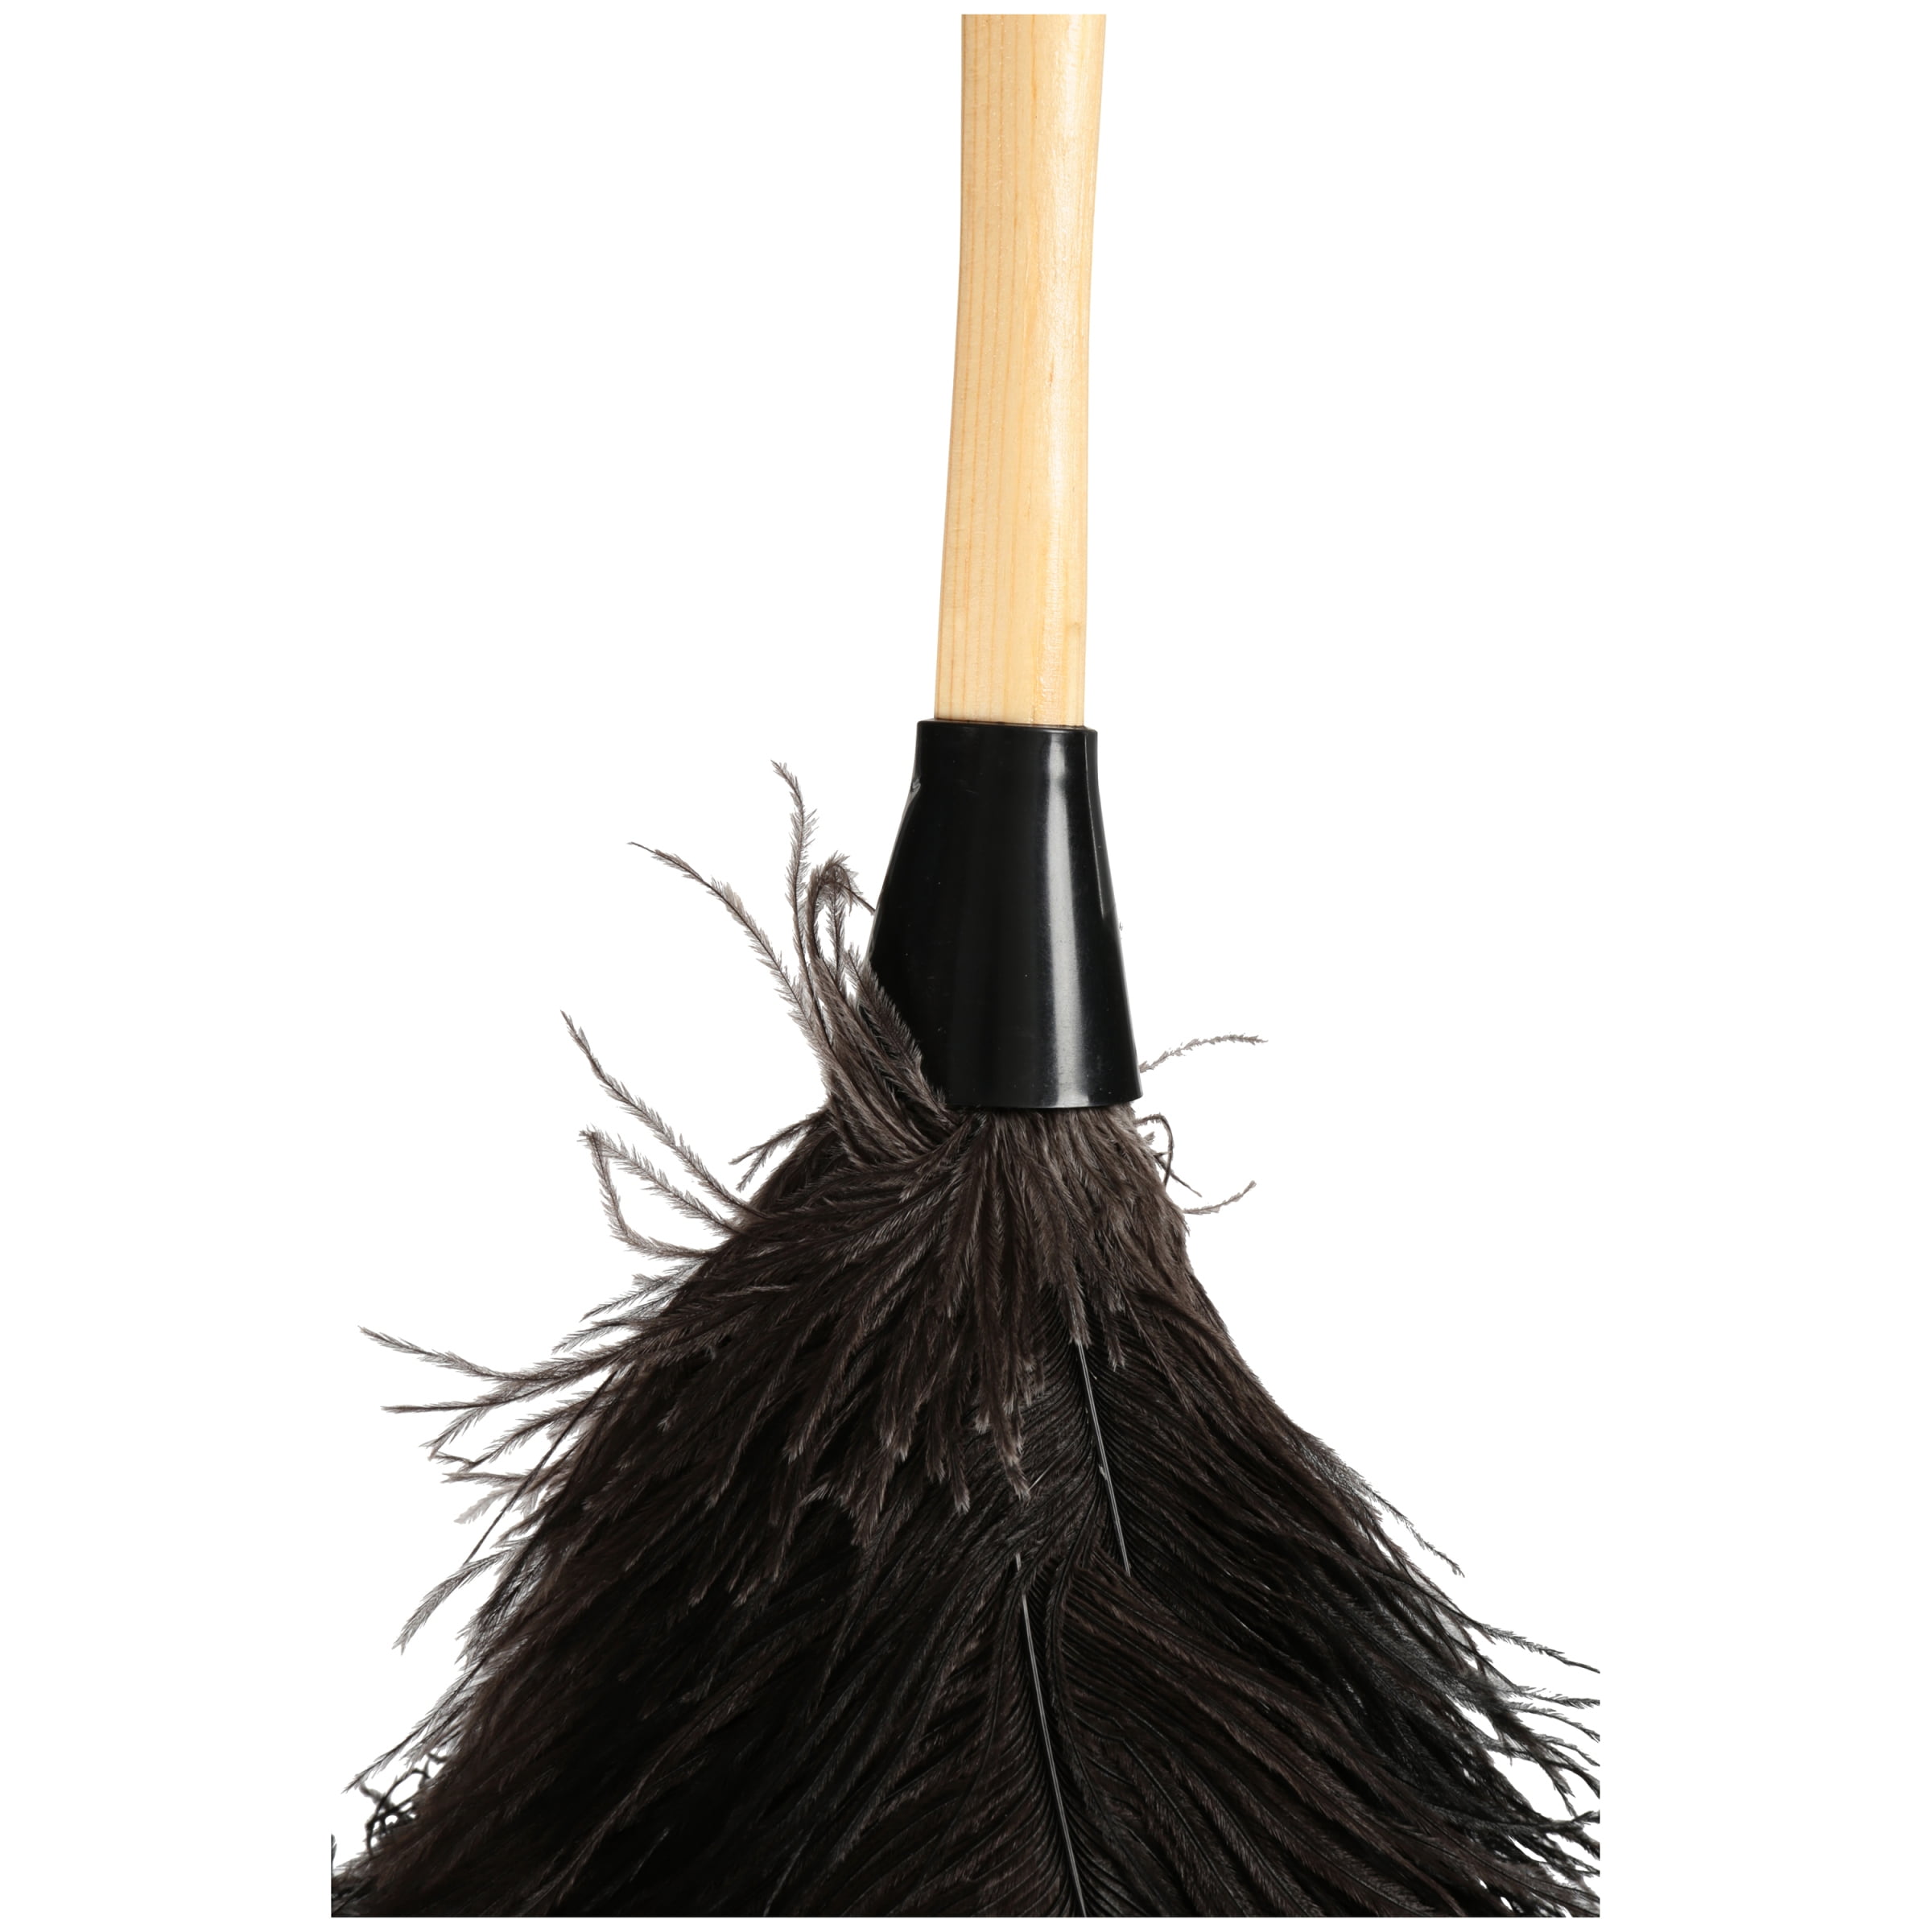 DUSTER/ Ostrich Feather, 23 – Croaker, Inc